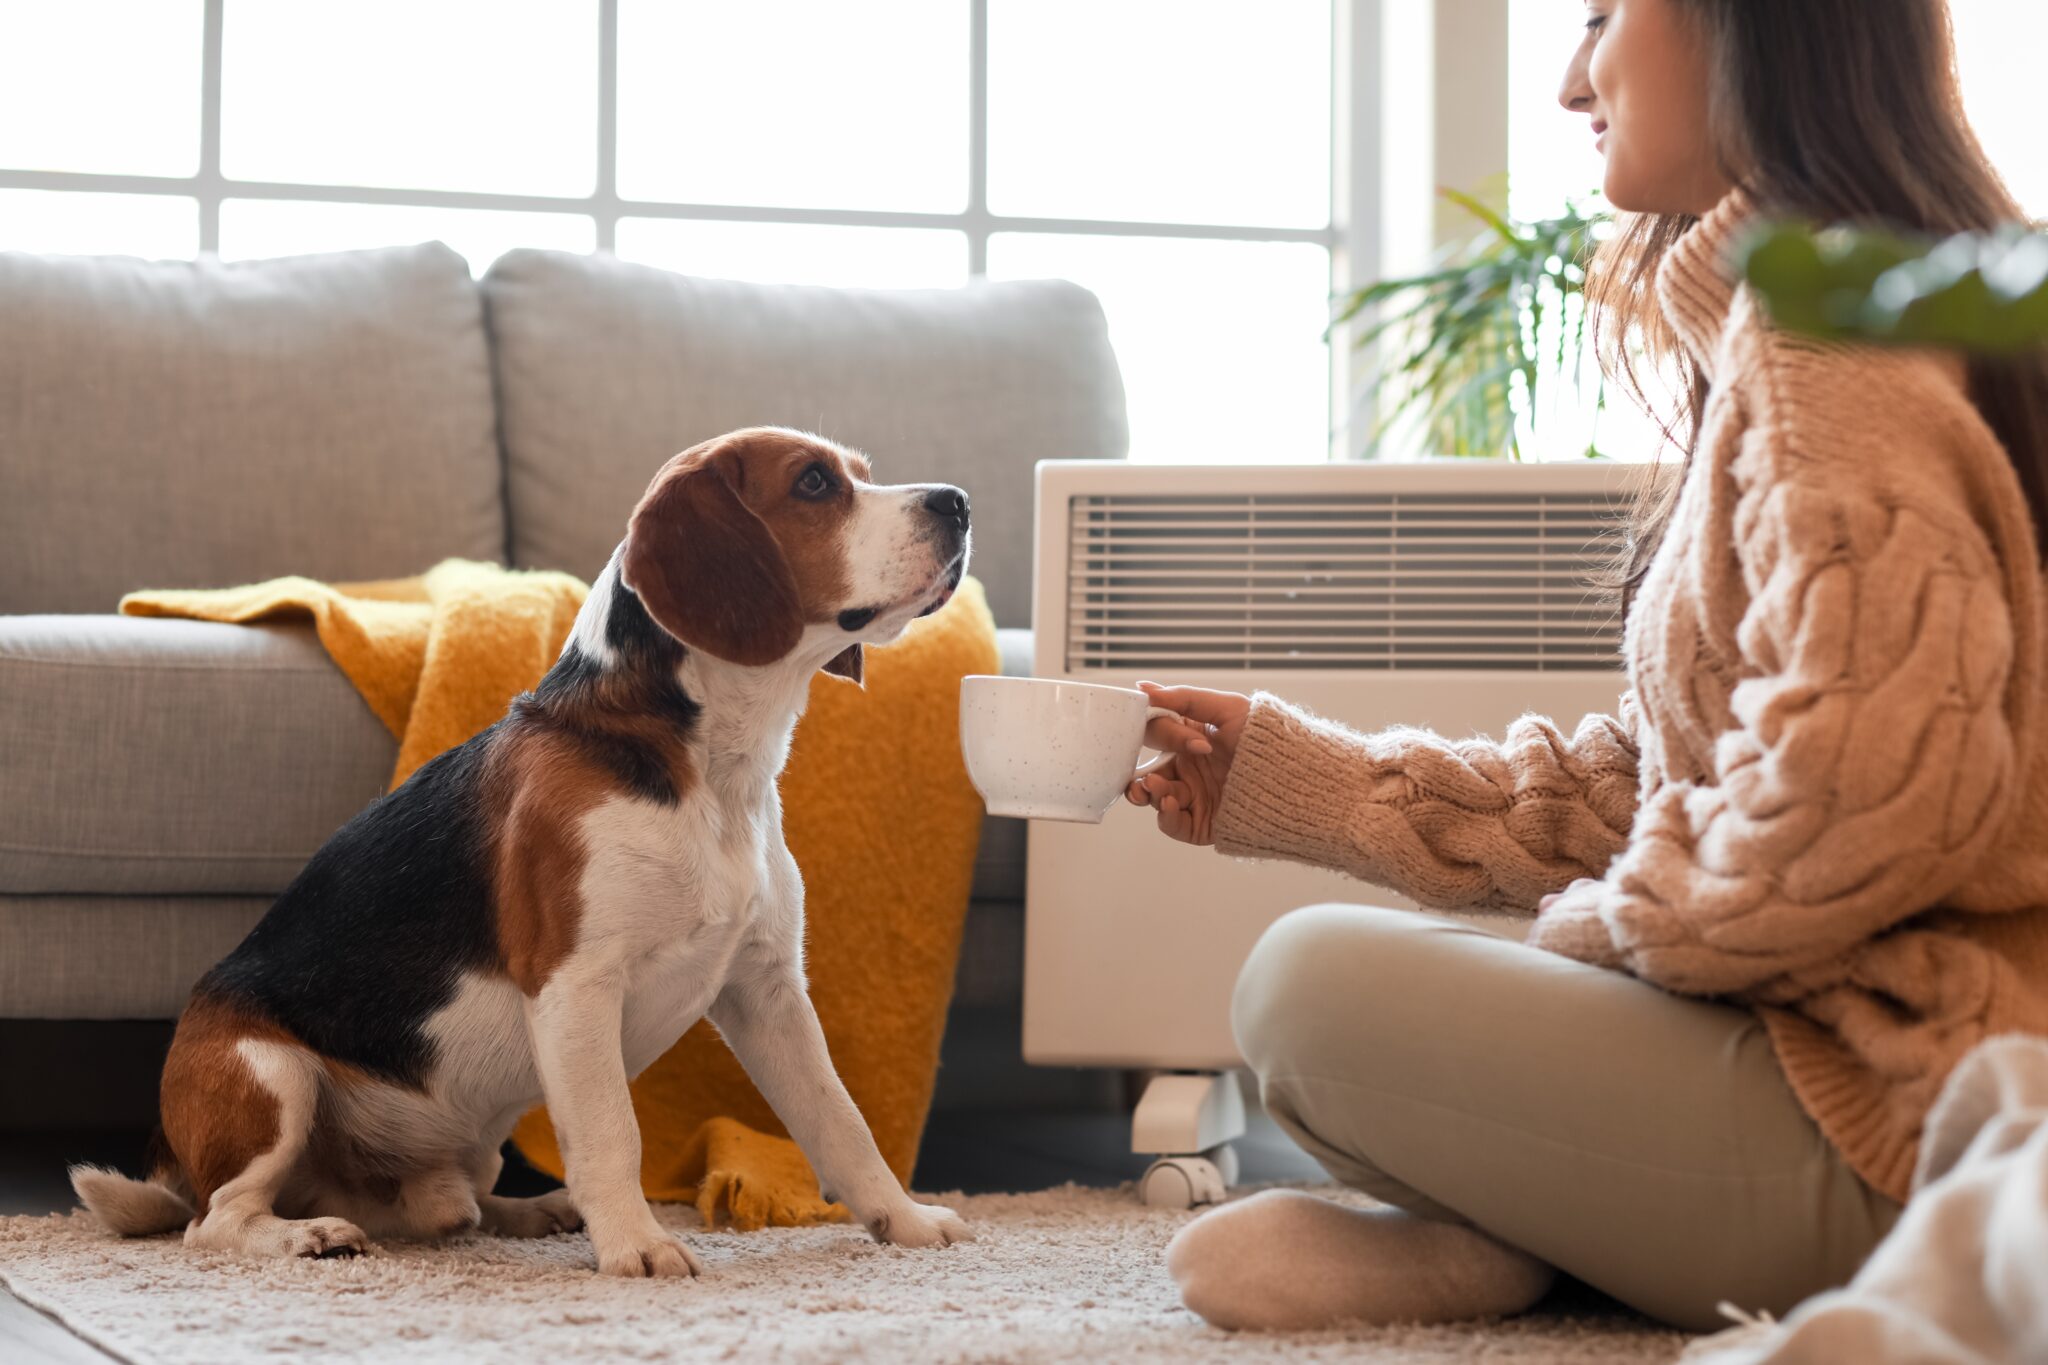 Woman,And,Cute,Beagle,Dog,Near,Convector,Heater,At,Home